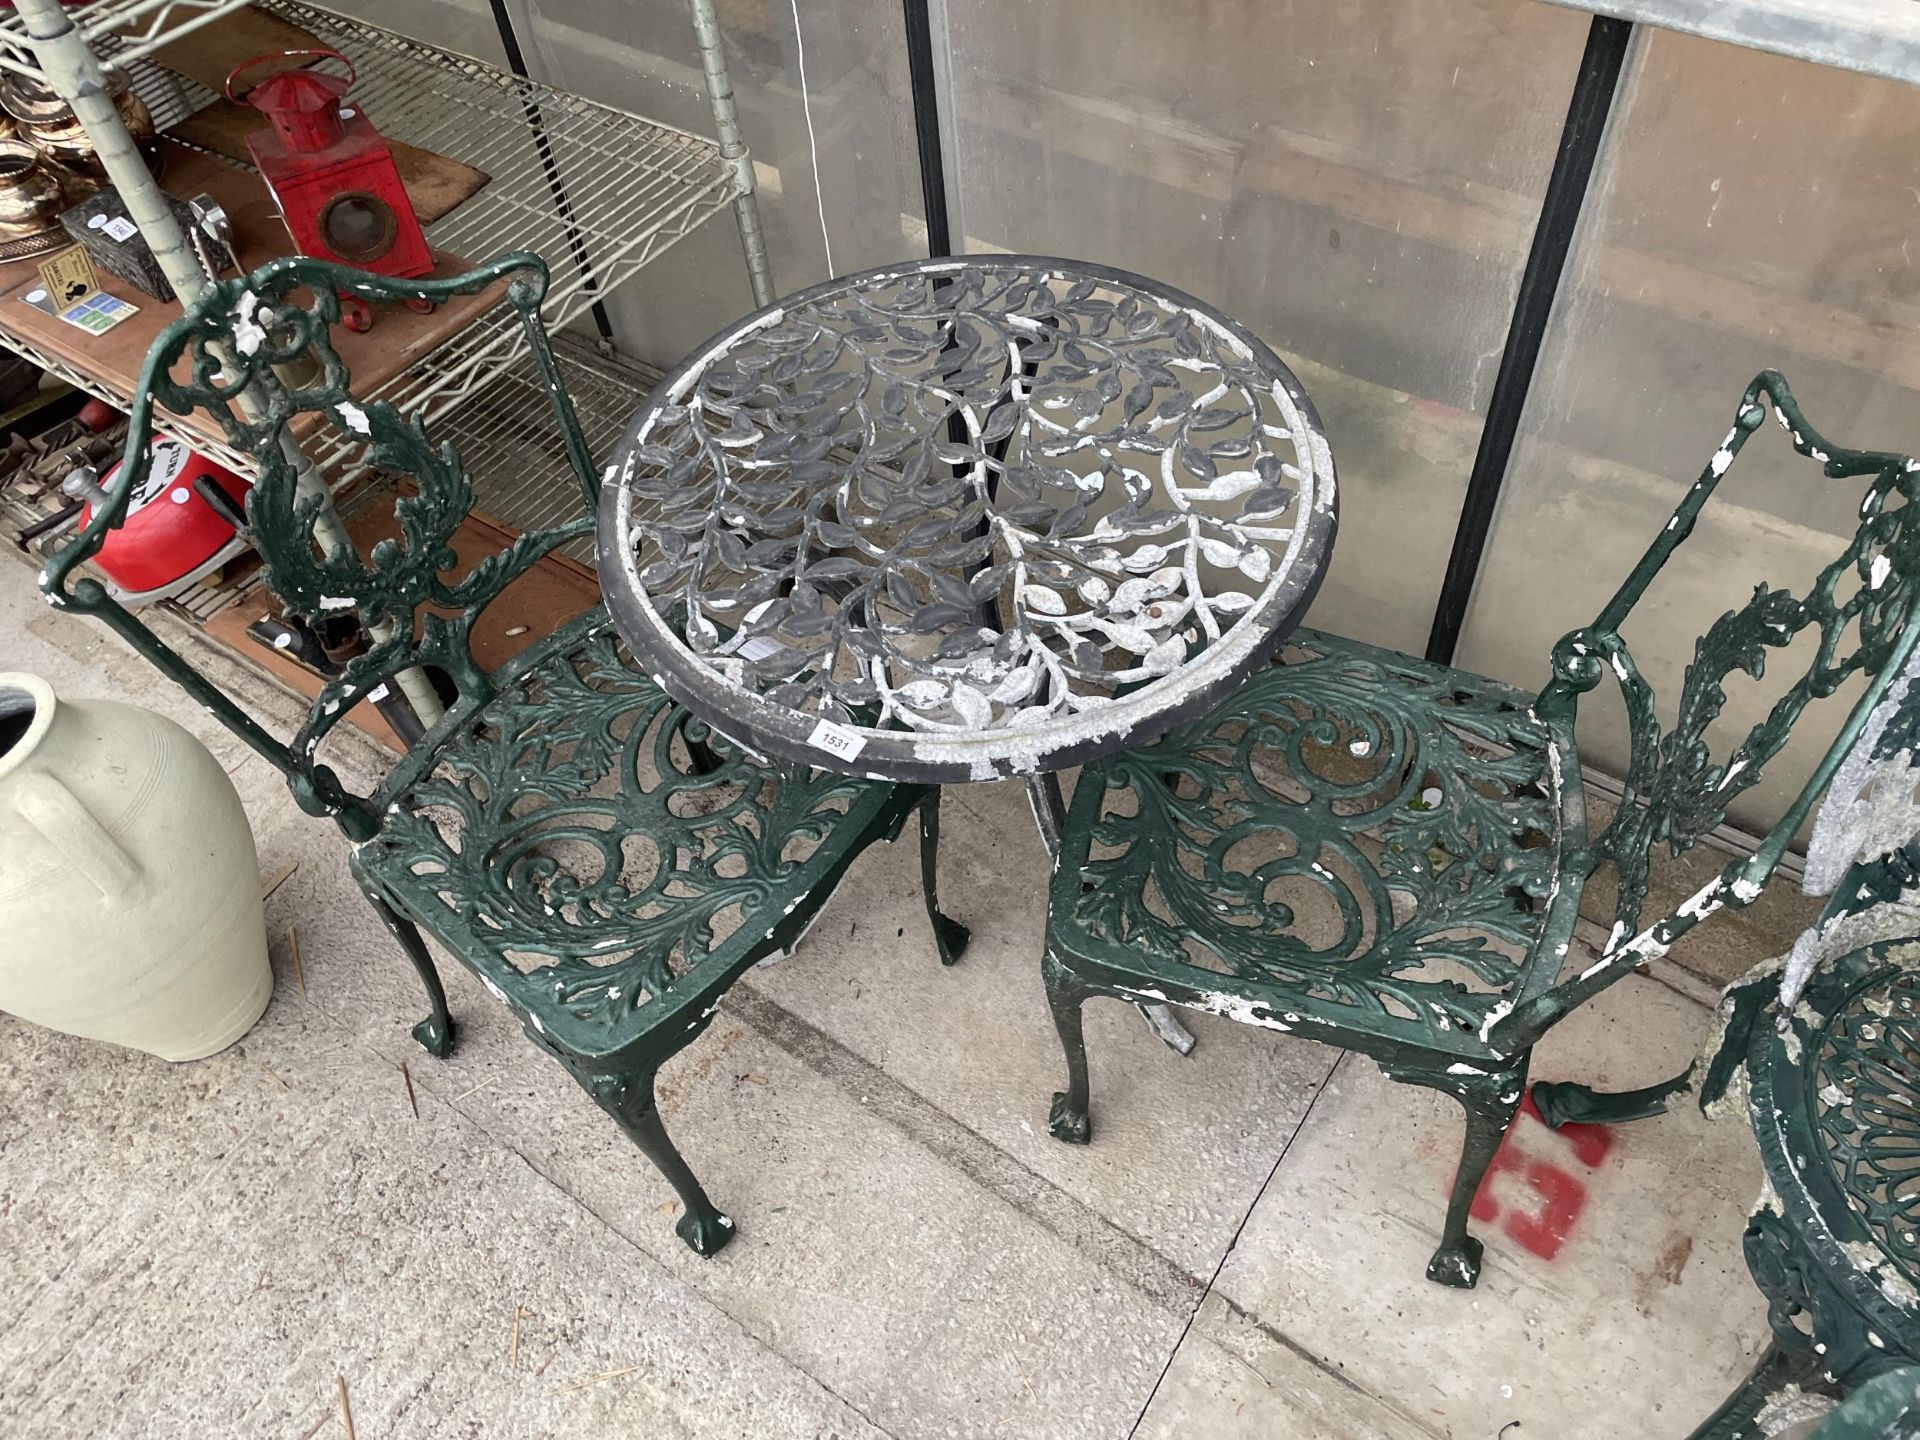 A CAST ALLOY BISTRO TABLE AND TWO CAST ALLOY CHAIRS - Image 2 of 2